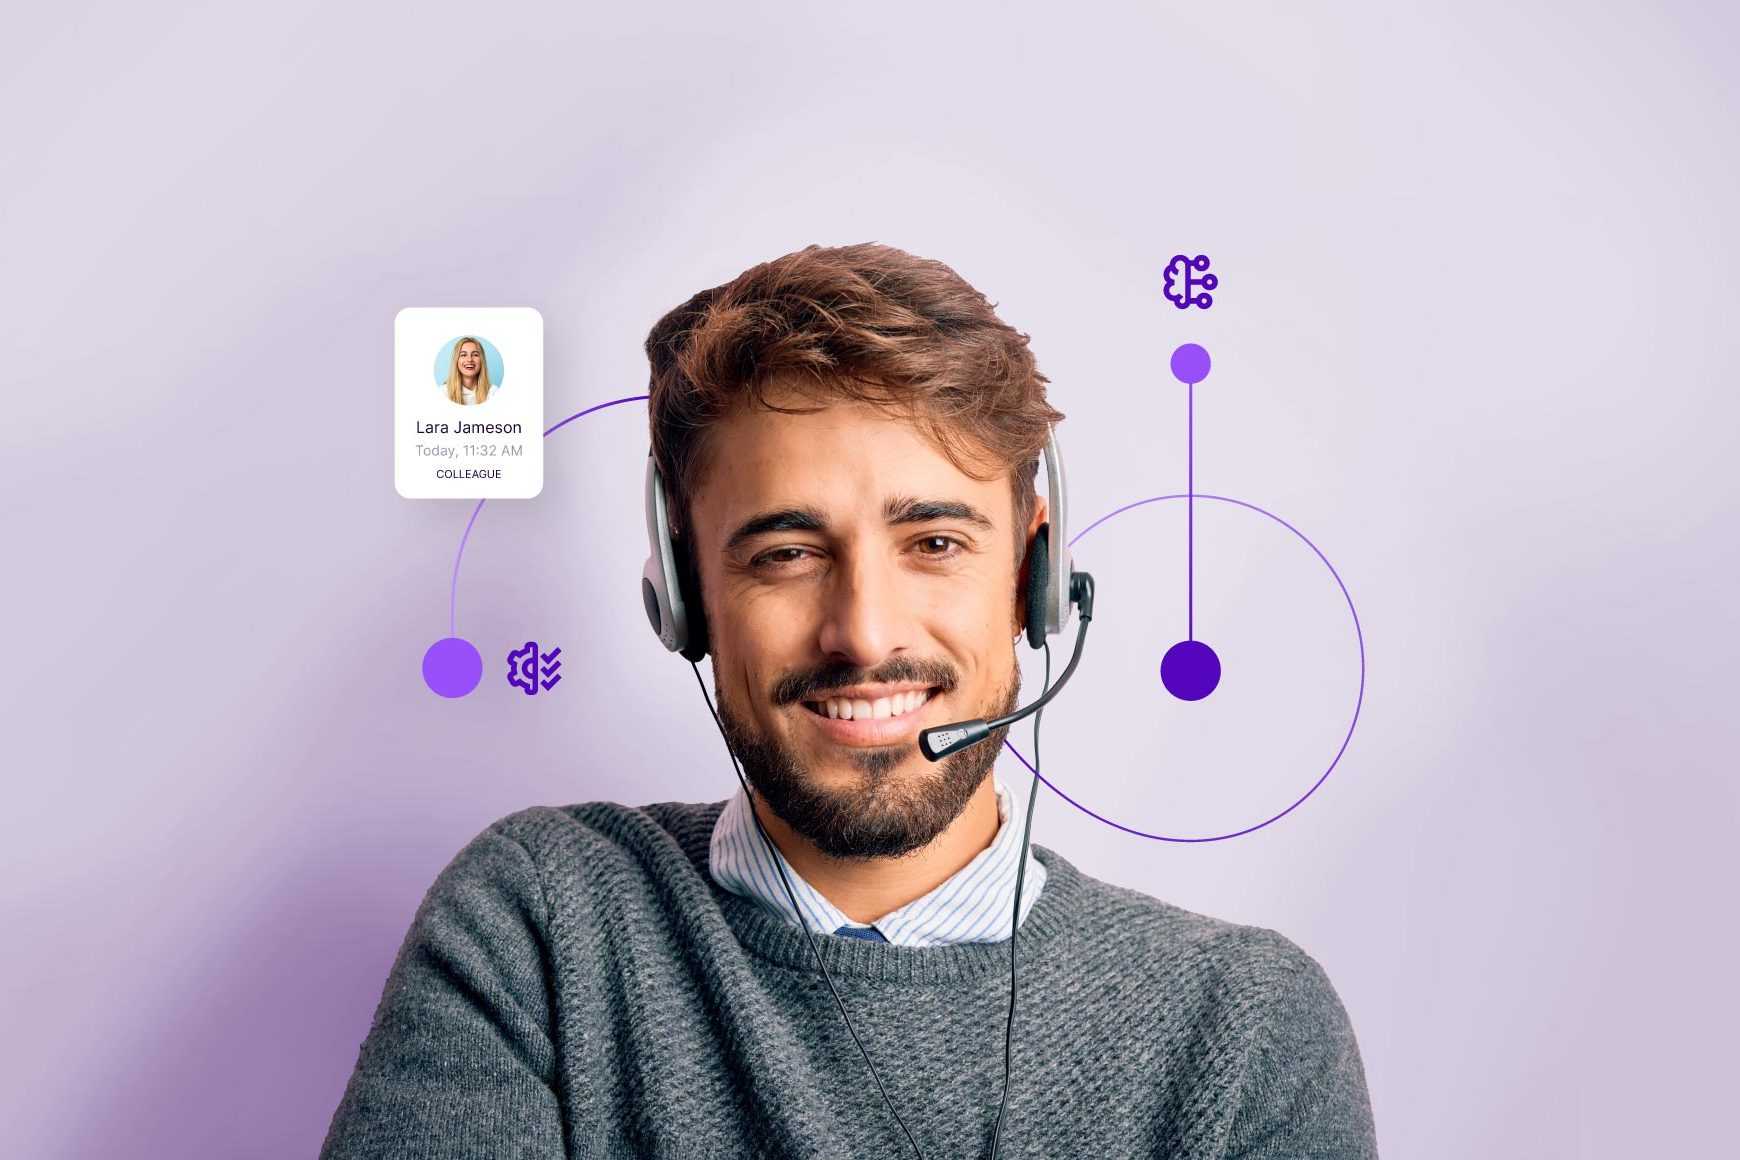 Embrace the digital era by automating key business processes in the contact center